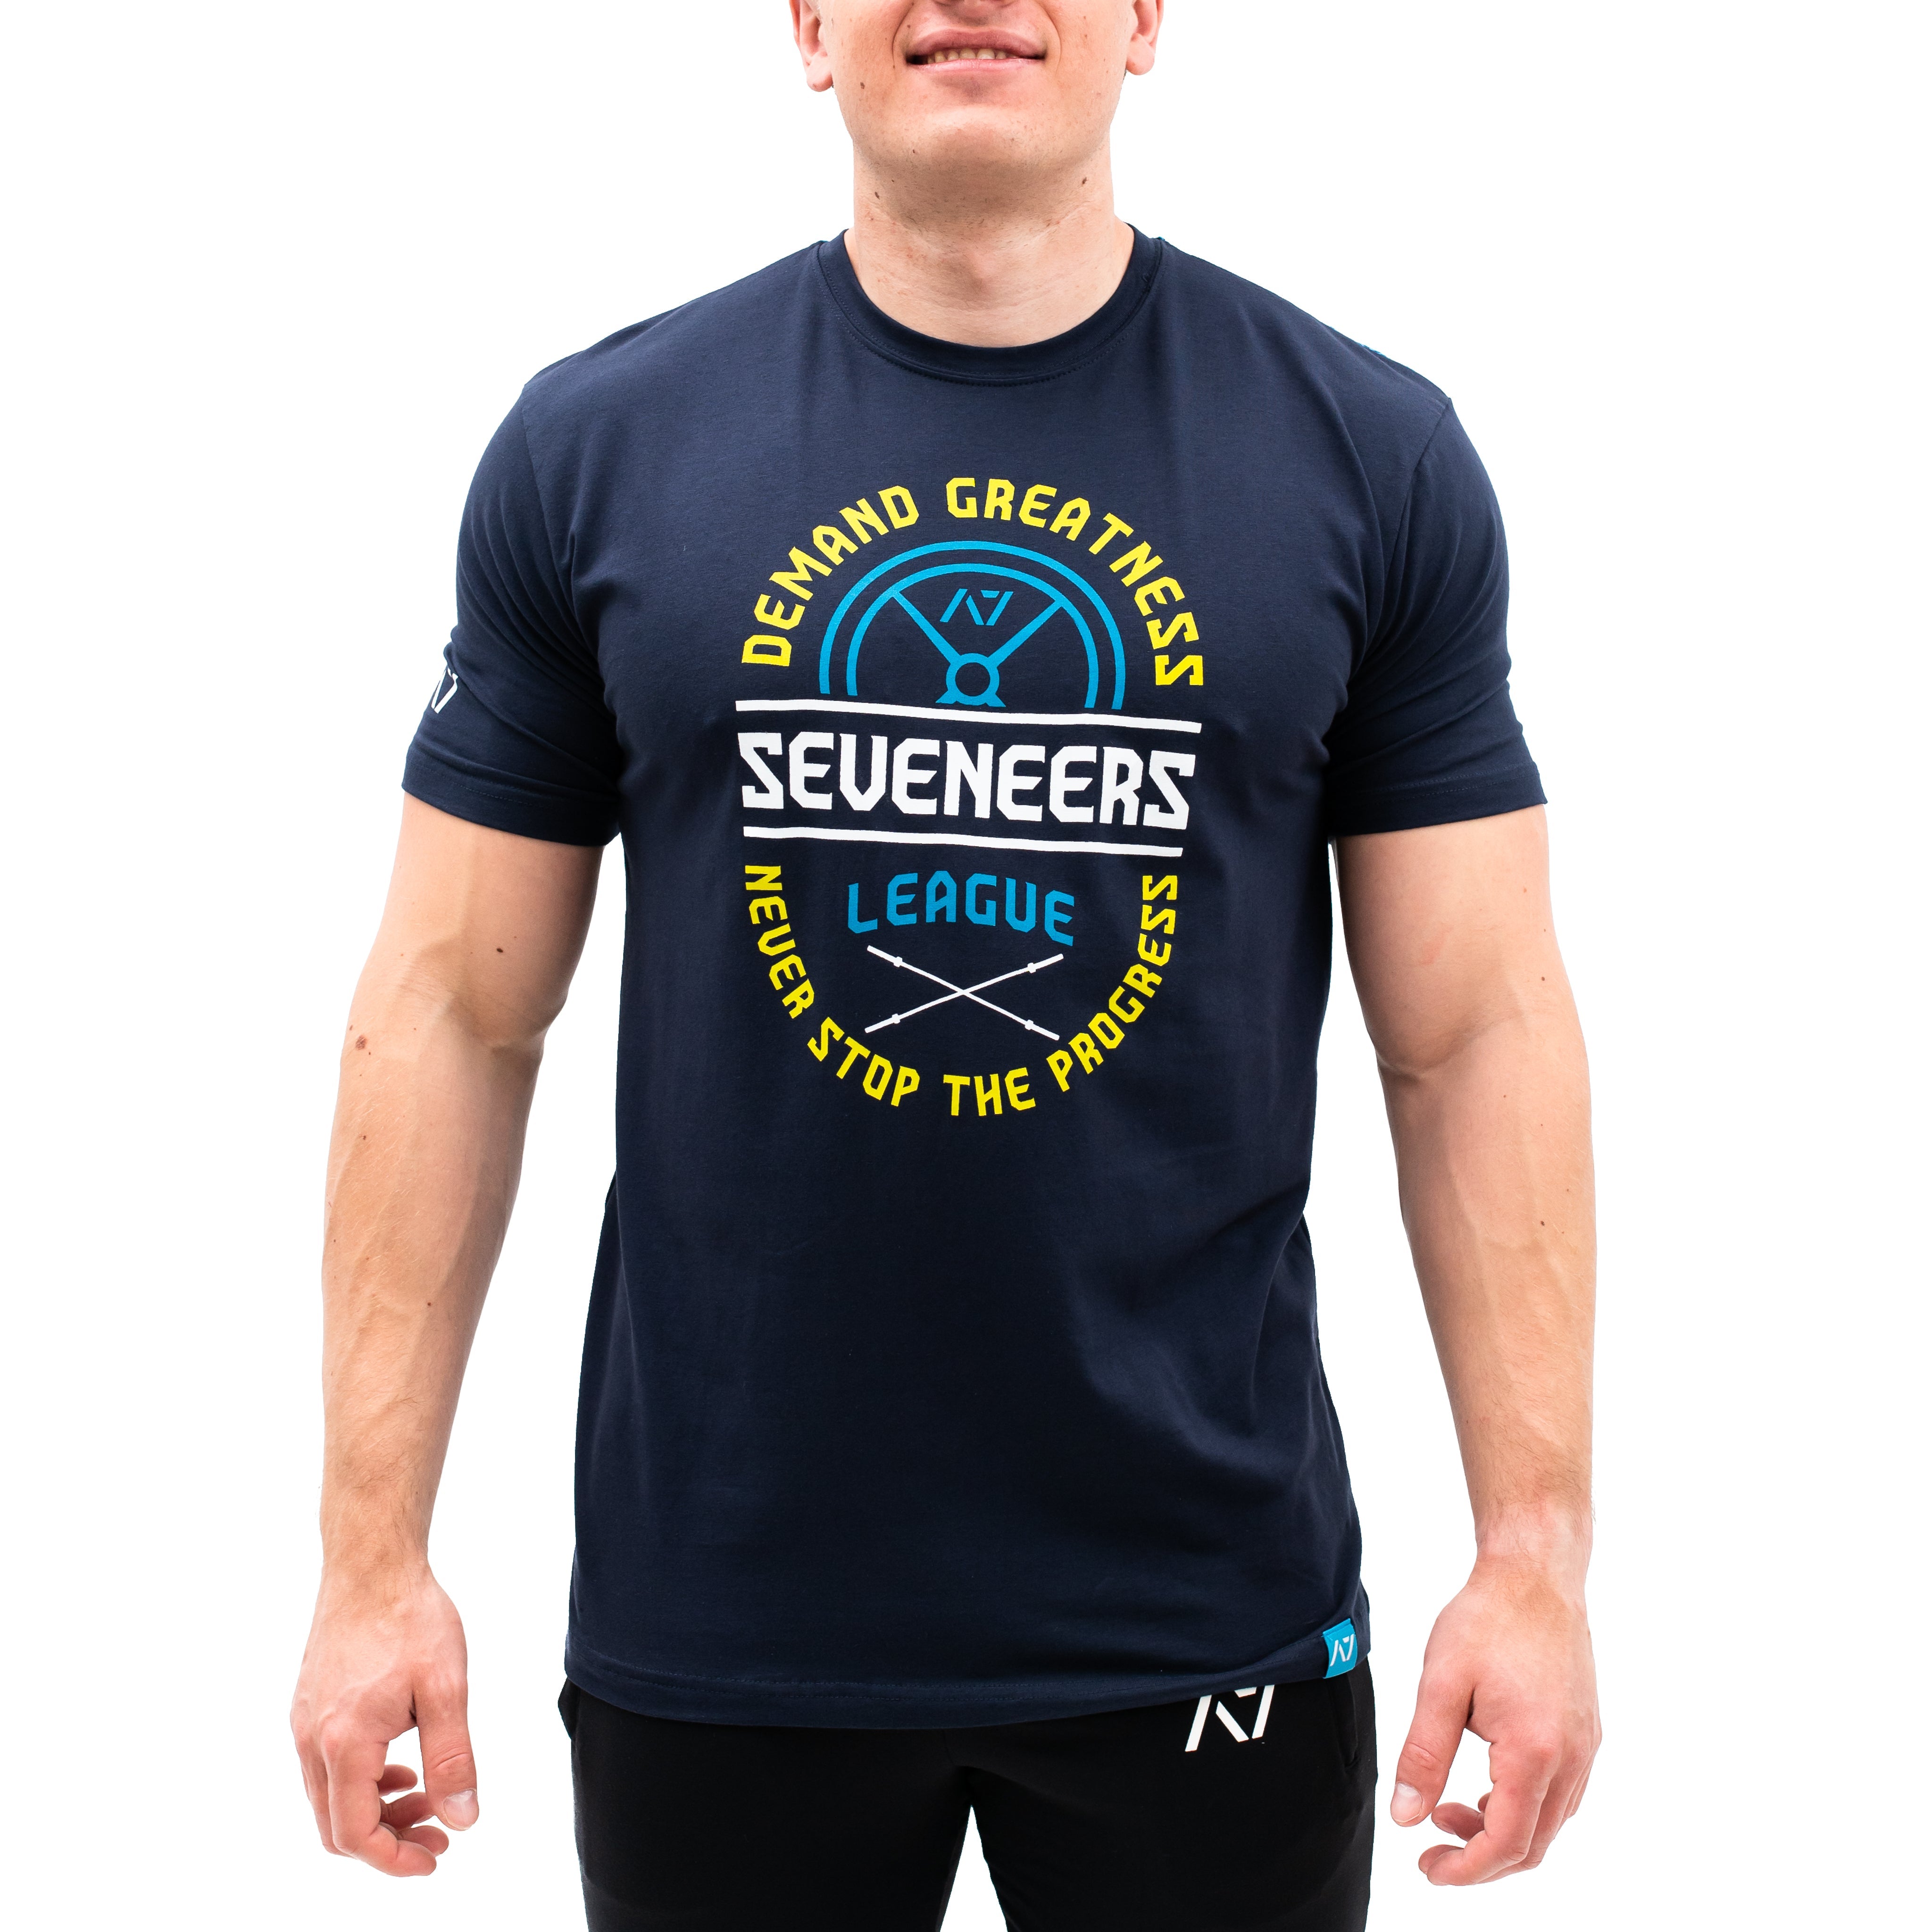 The Seveneers League bar grip - we demand greatness from life and never stop progressing towards out goals! A7 bar grip helps you stick to the bench during bench press and anchors the barbell to your back when squatting. Bar Grip is the ultimate training shirt for powerlifting, strongman and weightlifting workouts. Seveneers Bar Grip is a perfect gift for a powerlifter. Purchase Seveneers League Bar Grip from A7 UK for shipping to UK.